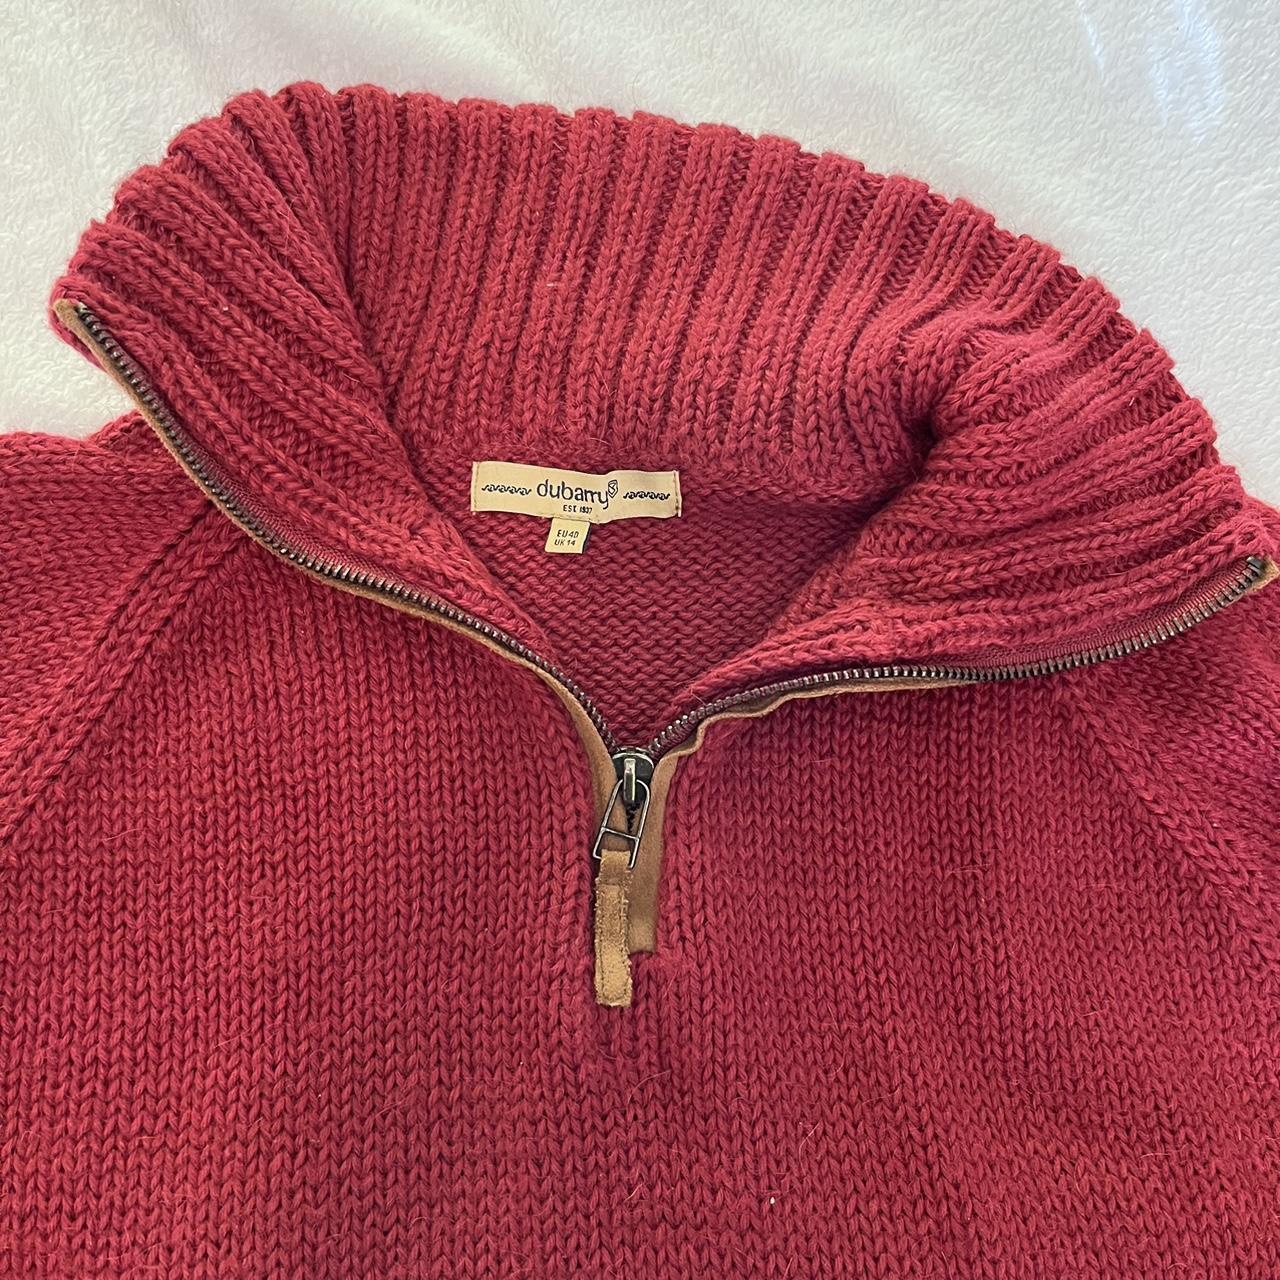 Dubarry Women's Red and Brown Jumper